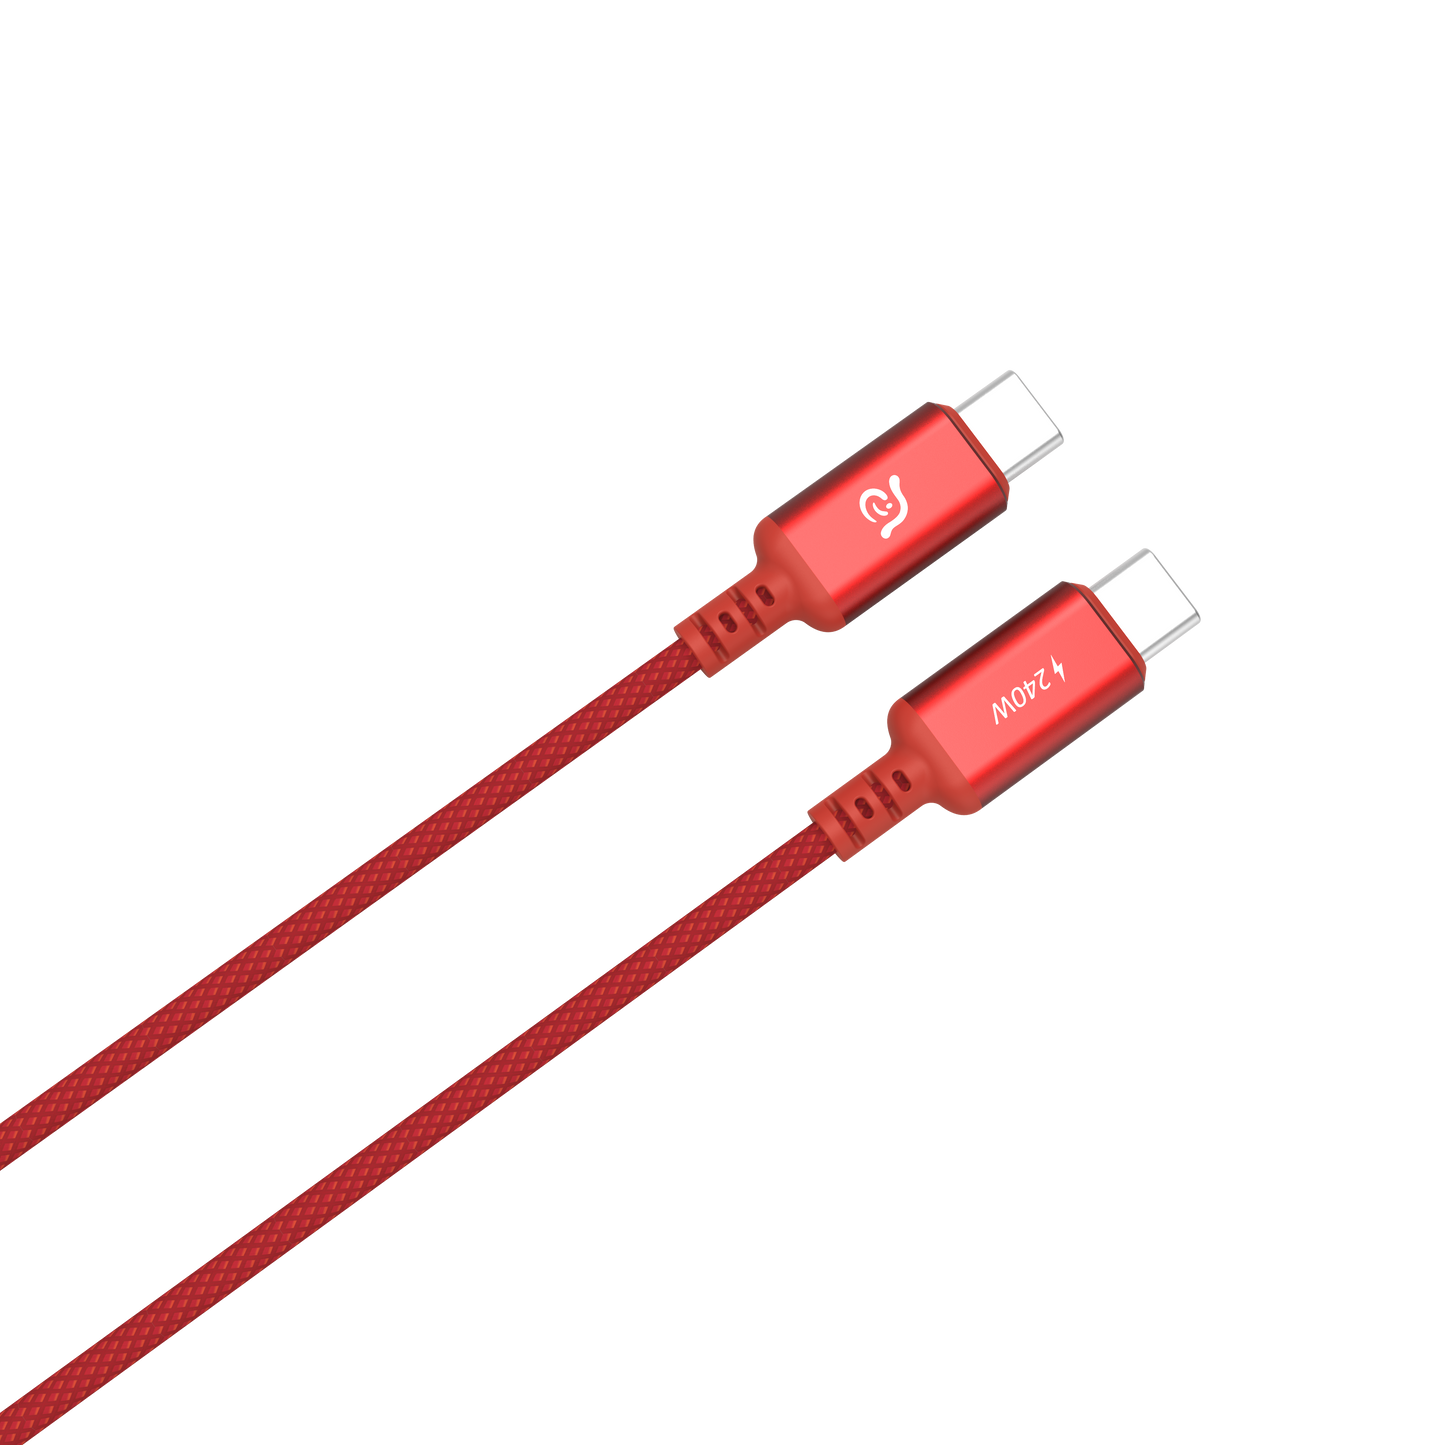 ADAM ELEMENTS CASA P120 USB-C to USB-C 240W Cable 1.2m - Red